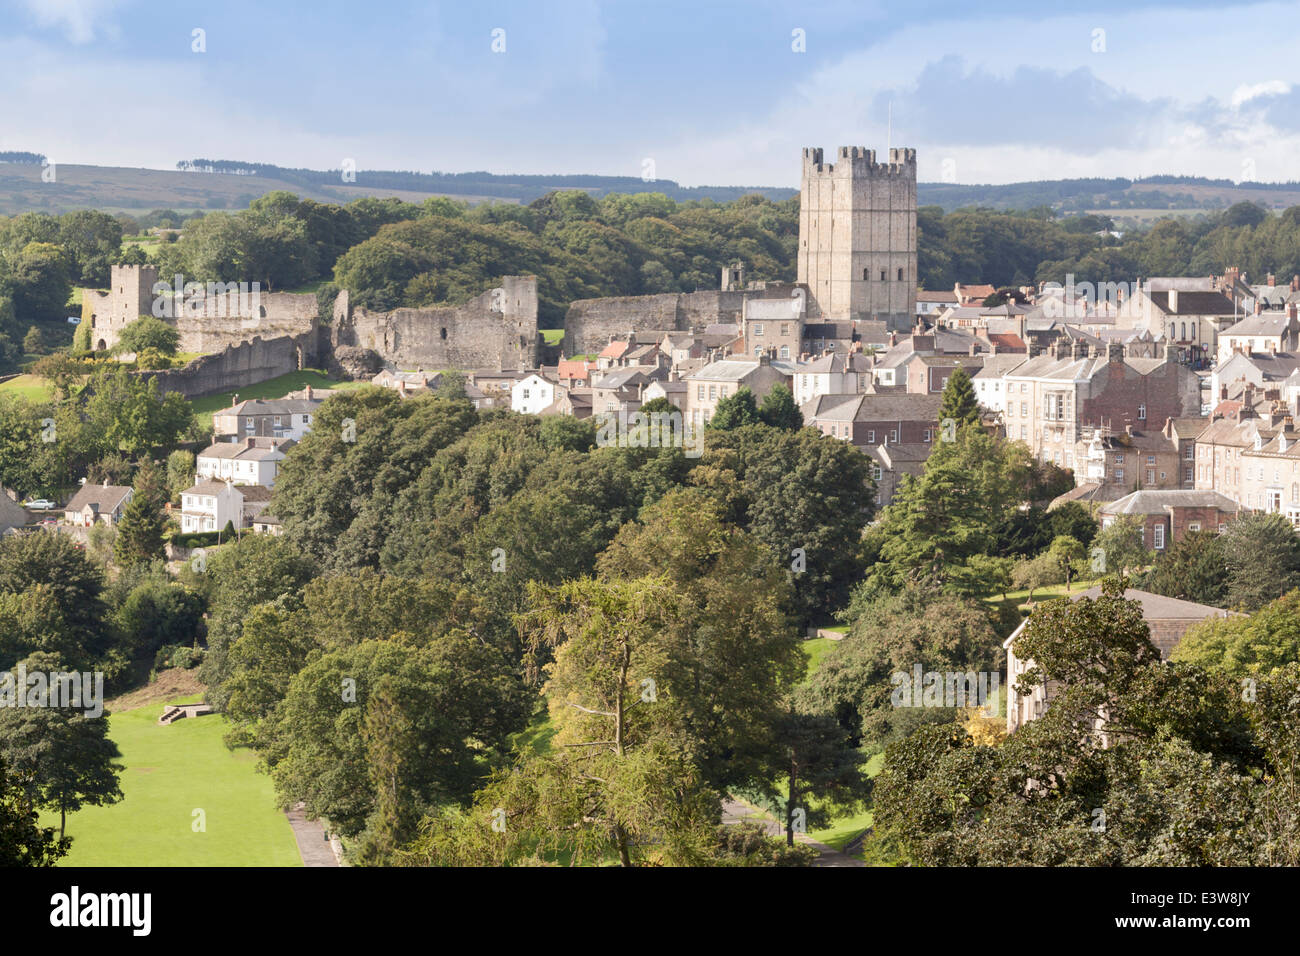 Richmond North Yorkshire  scene showing the Castle, Town, River Swale and The Batts Stock Photo